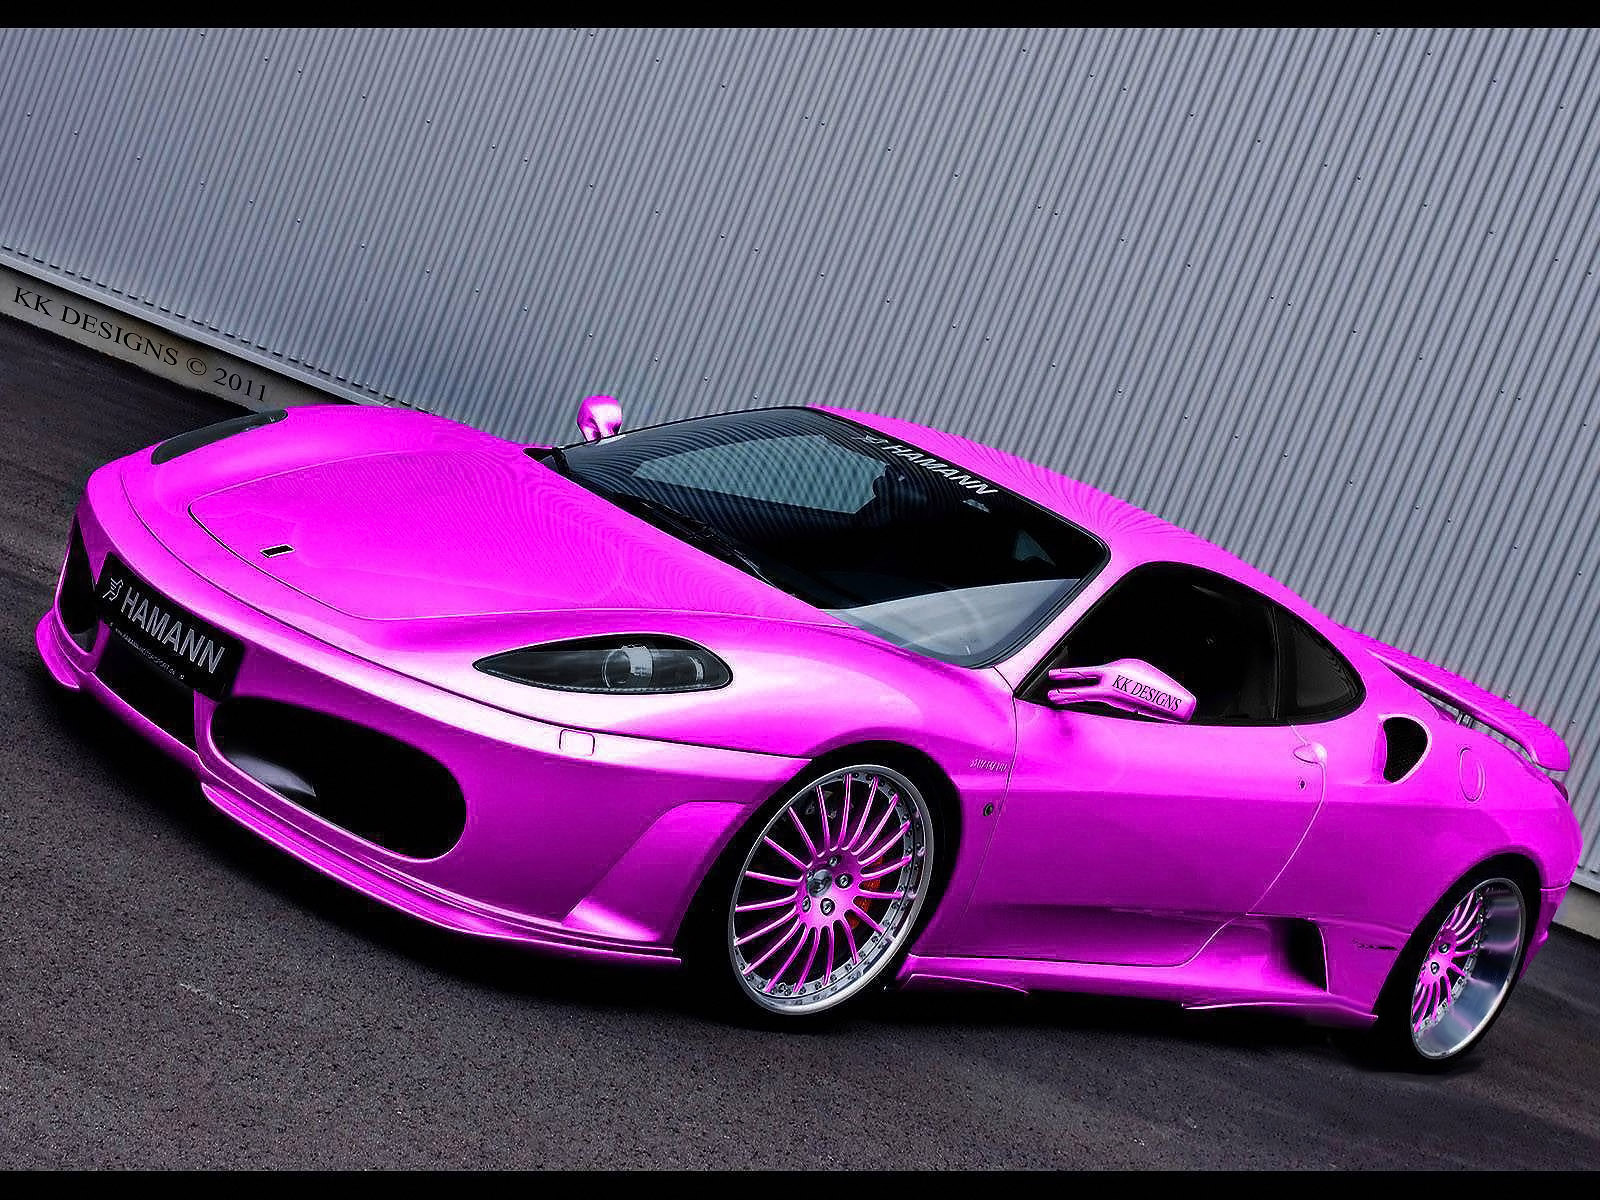 New Pink Car Wallpaper Full HD Pictures